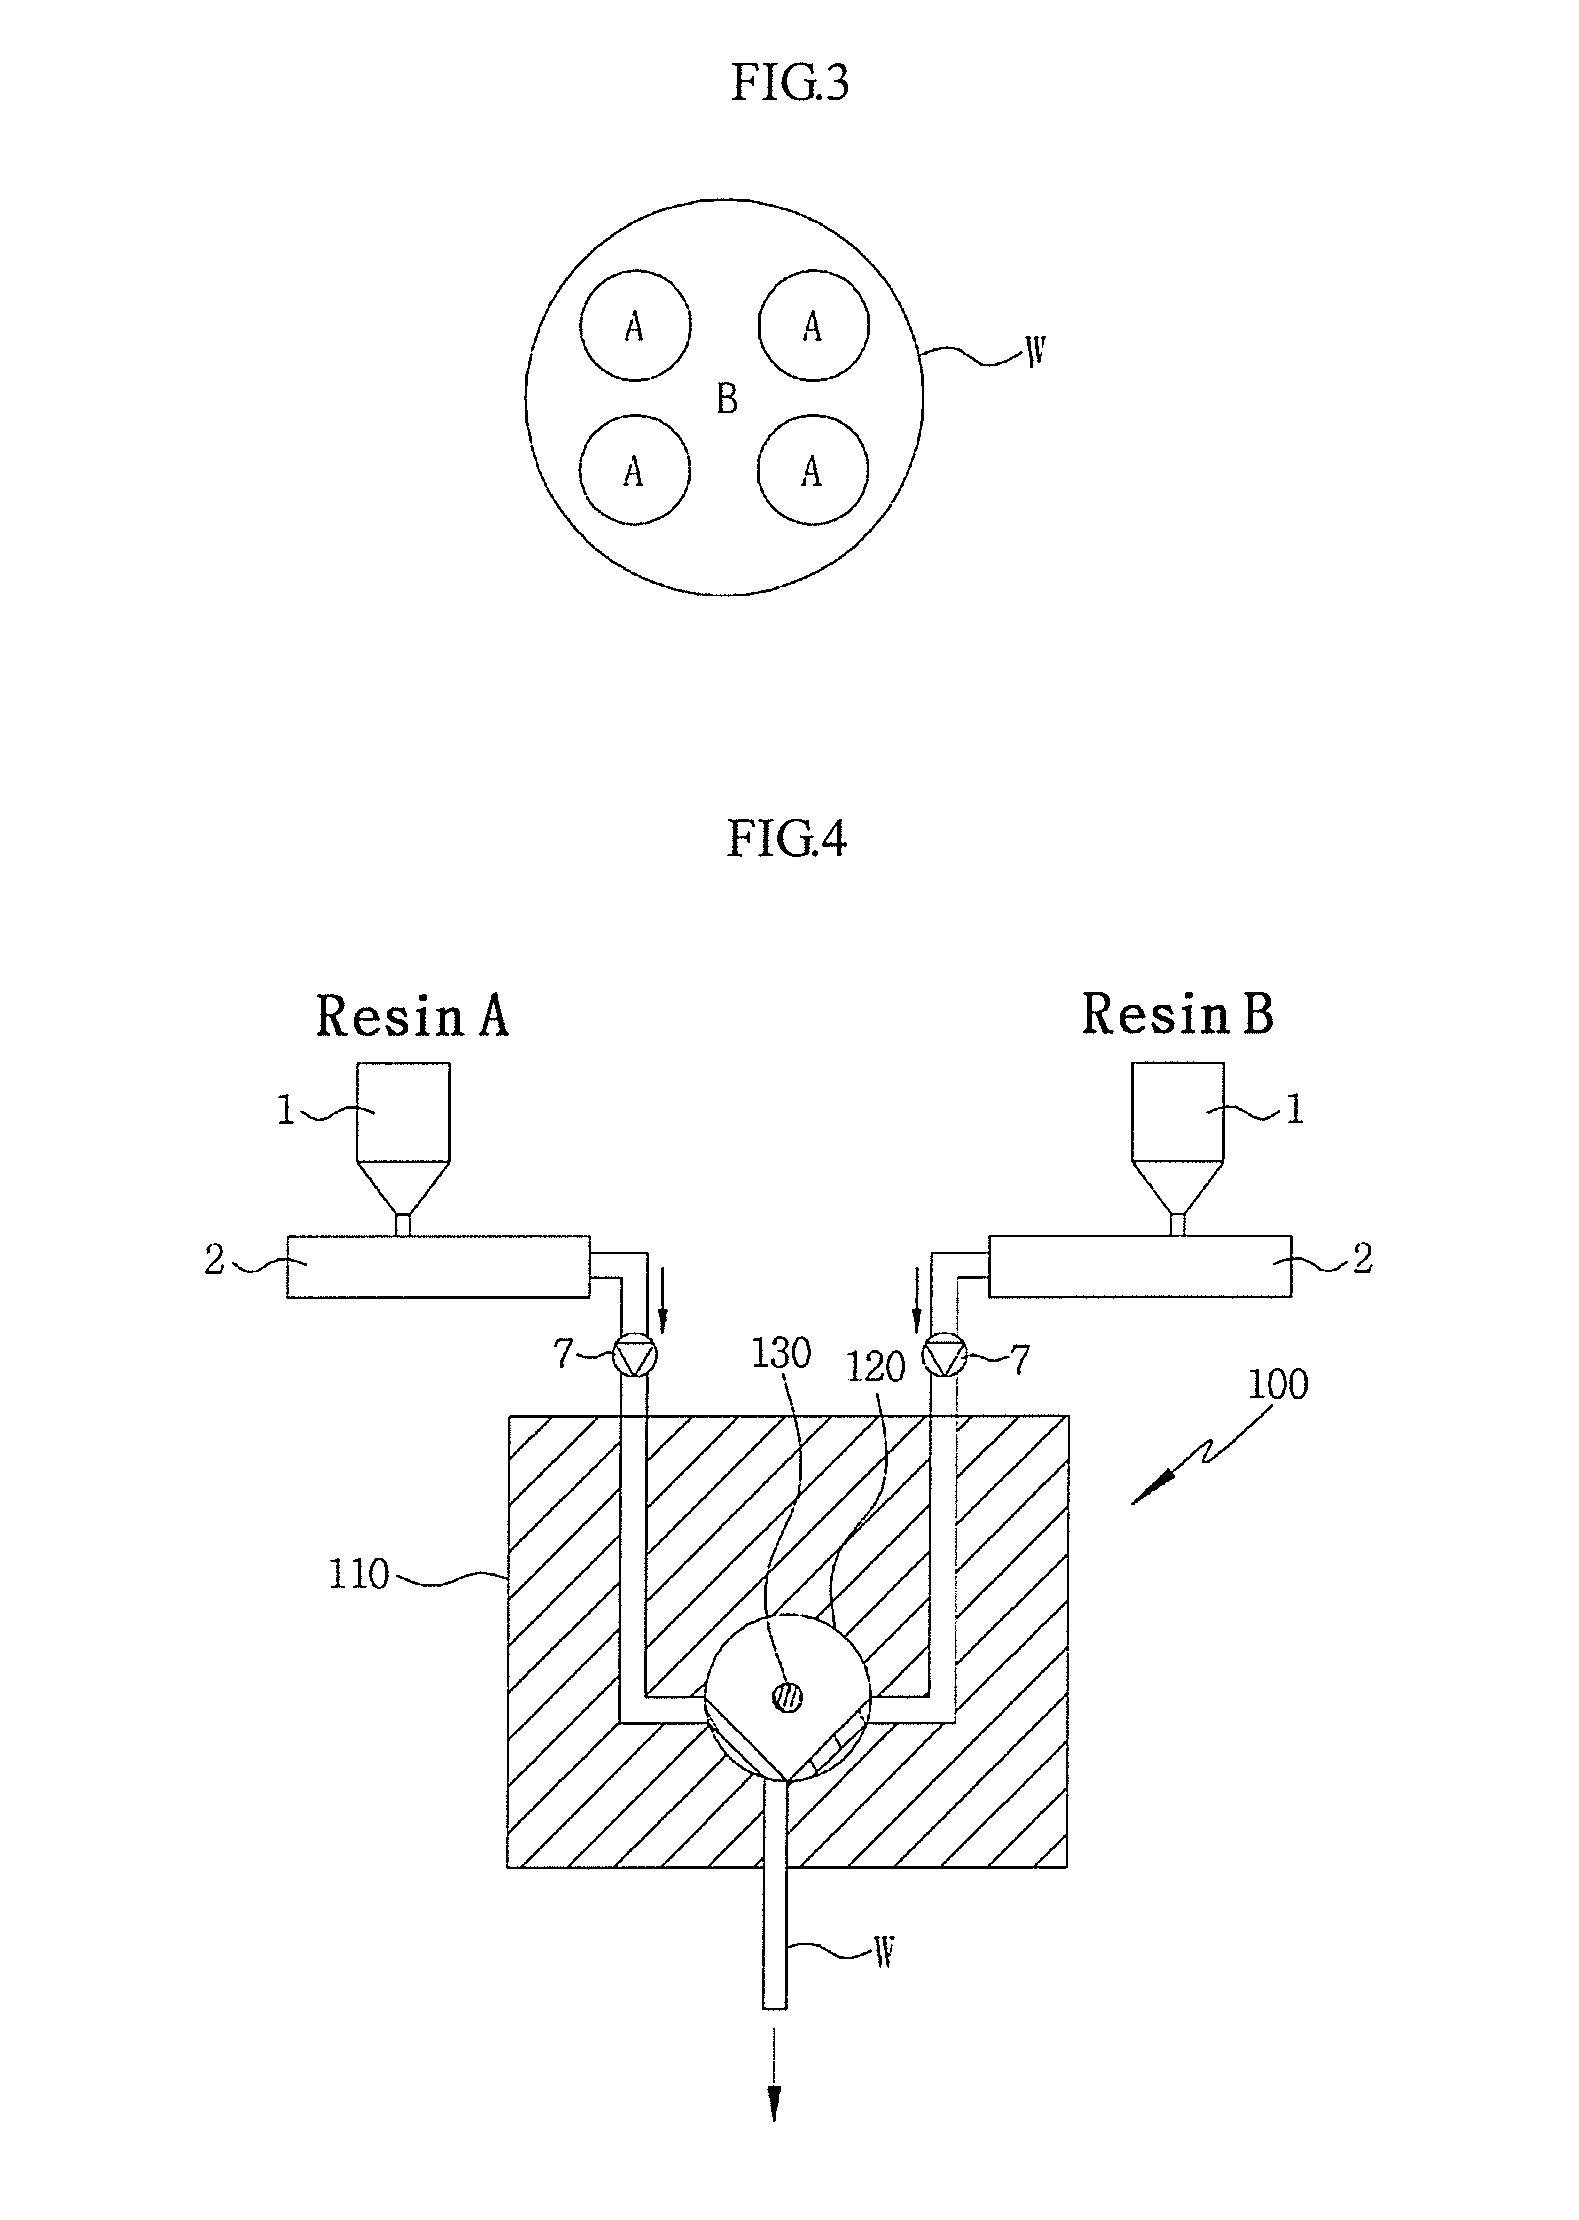 Method and apparatus for fabricating conjugate fiber, and conjugate fiber fabricated thereby